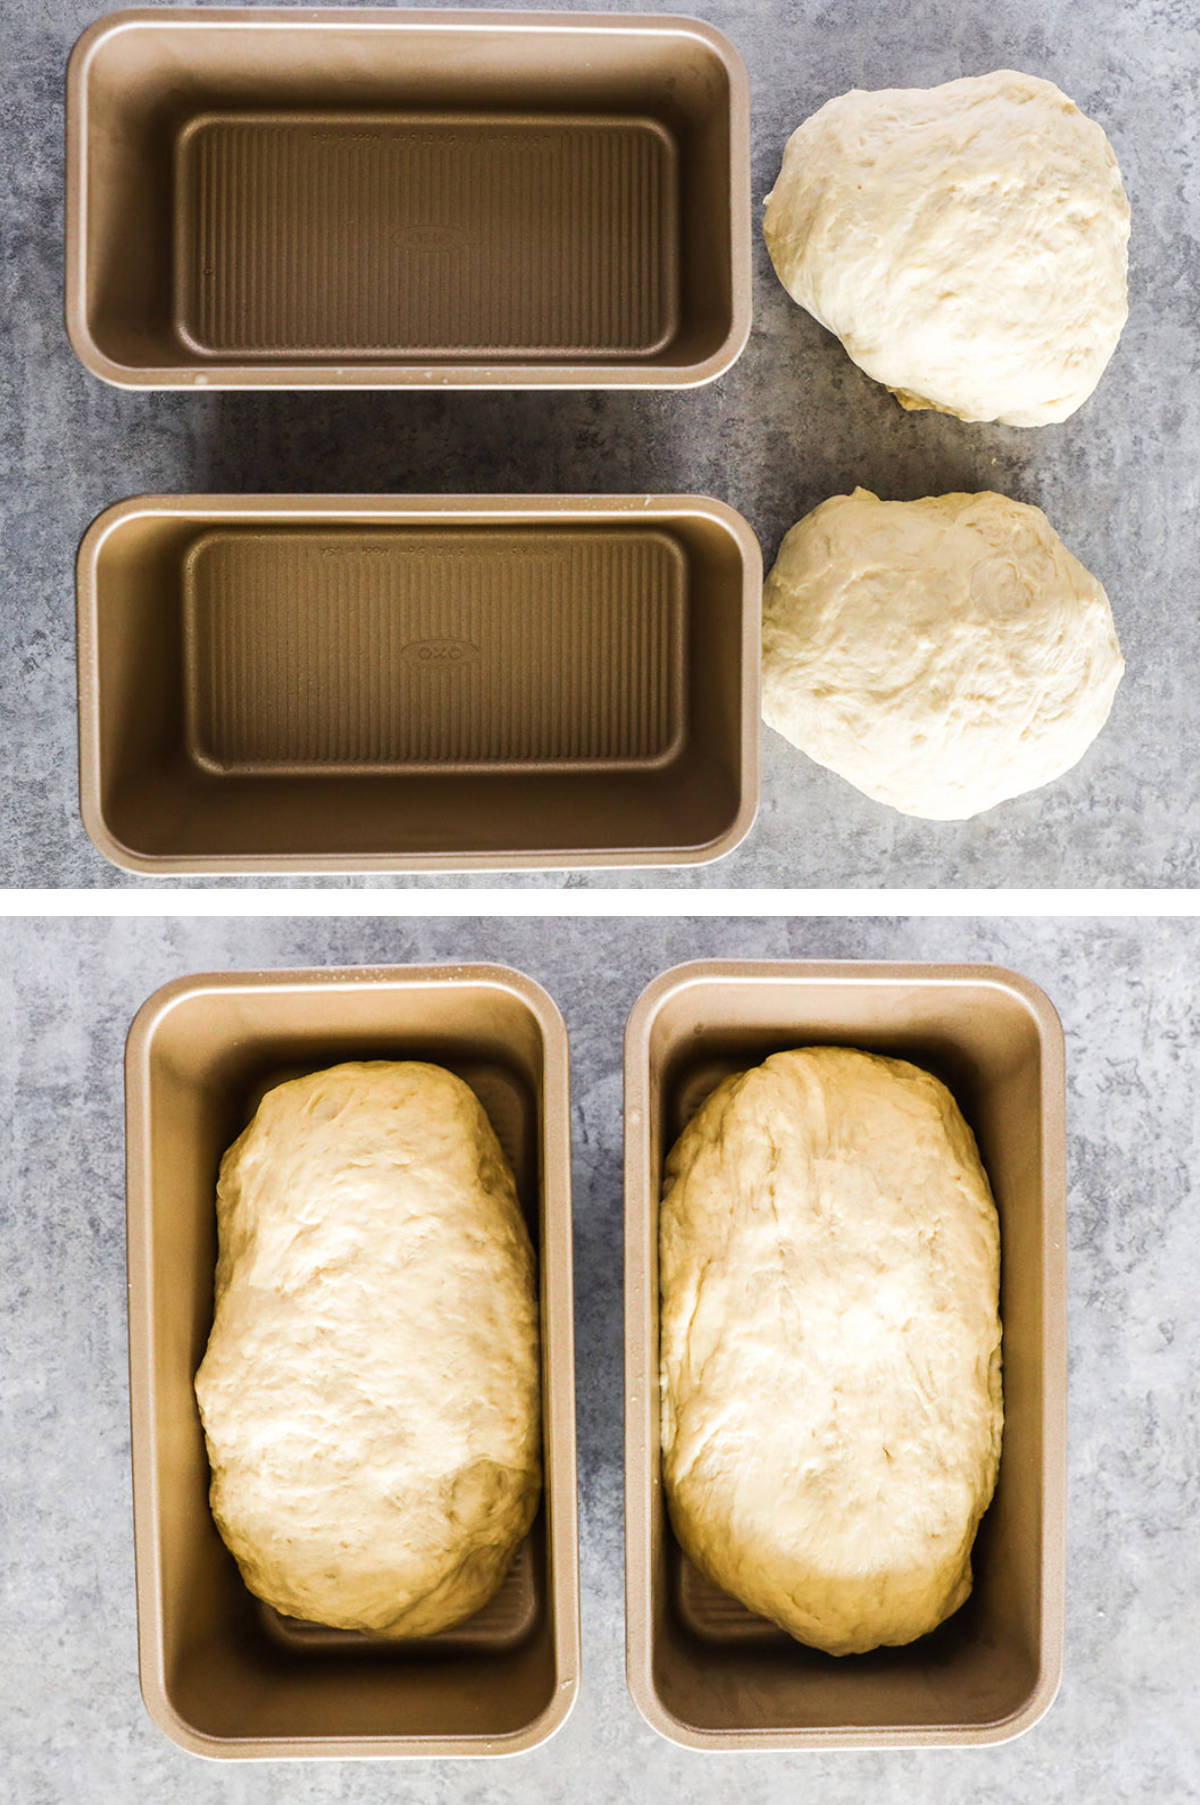 Two overhead images in one: 1. Two loaf pans with a ball of dough beside each one. 2. Each ball of dough has been placed into each loaf pan and stretched to fit. 